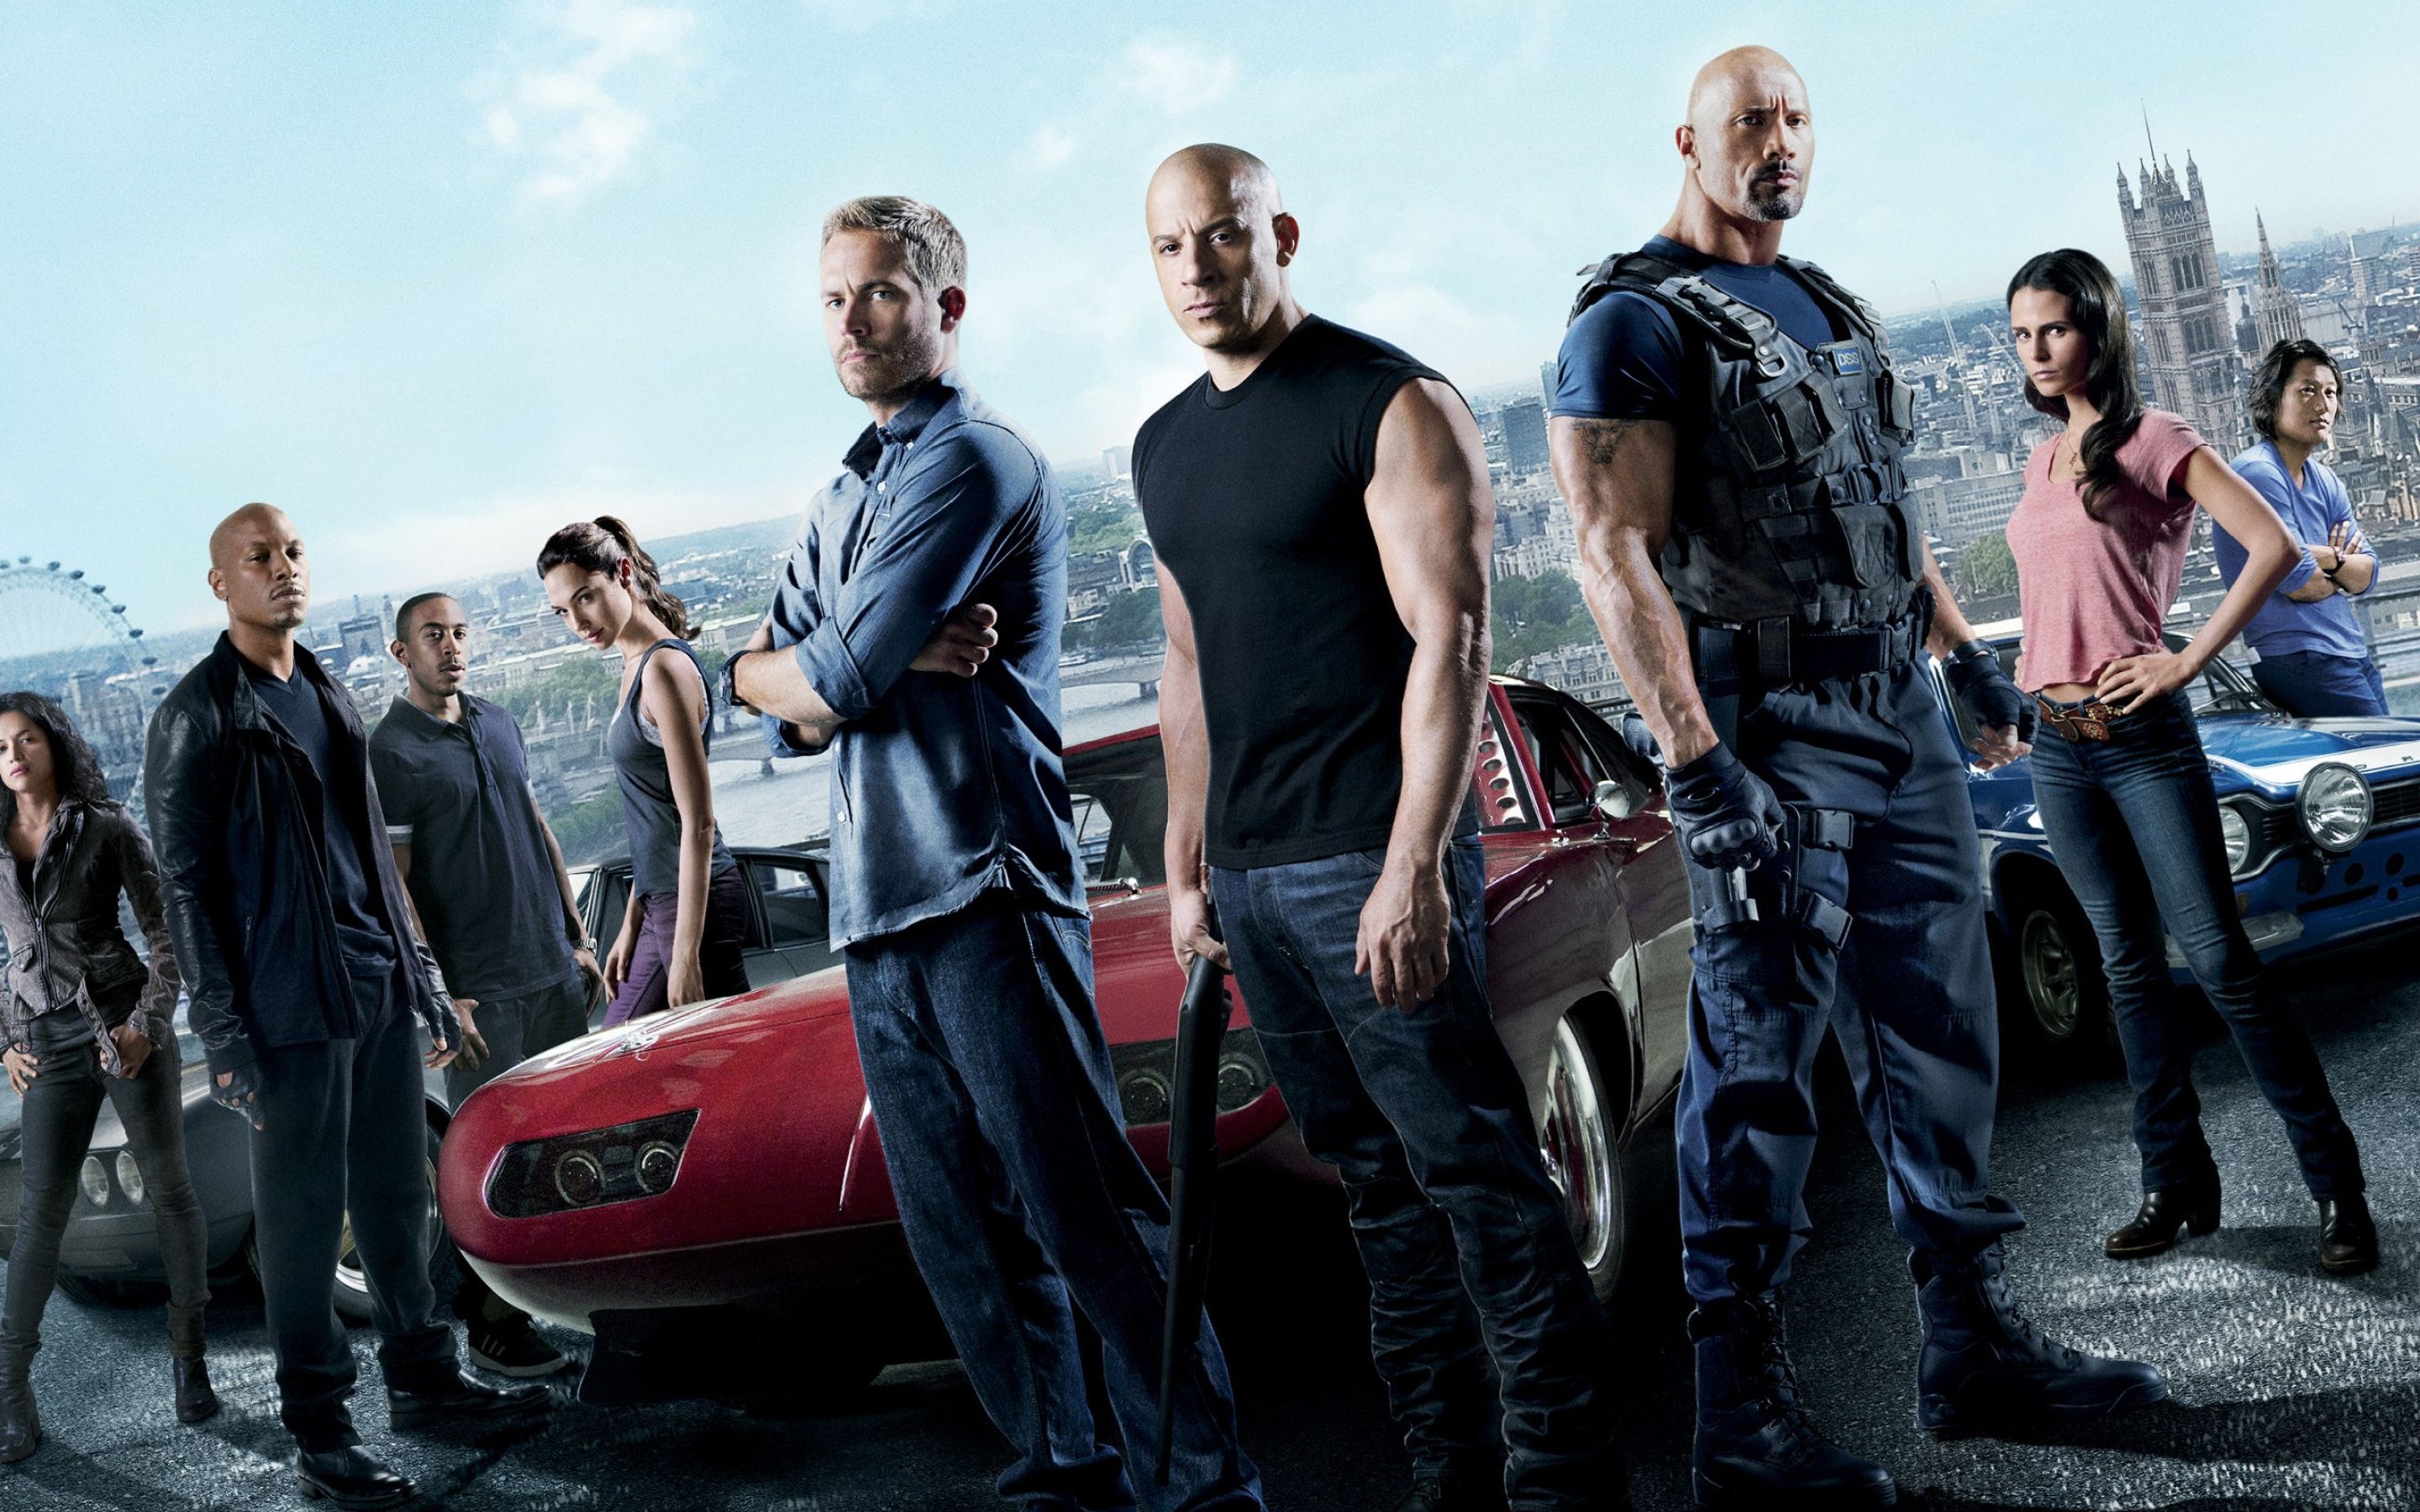 The Fast and the Furious, Desktop wallpapers, Top free backgrounds, 2880x1800 HD Desktop